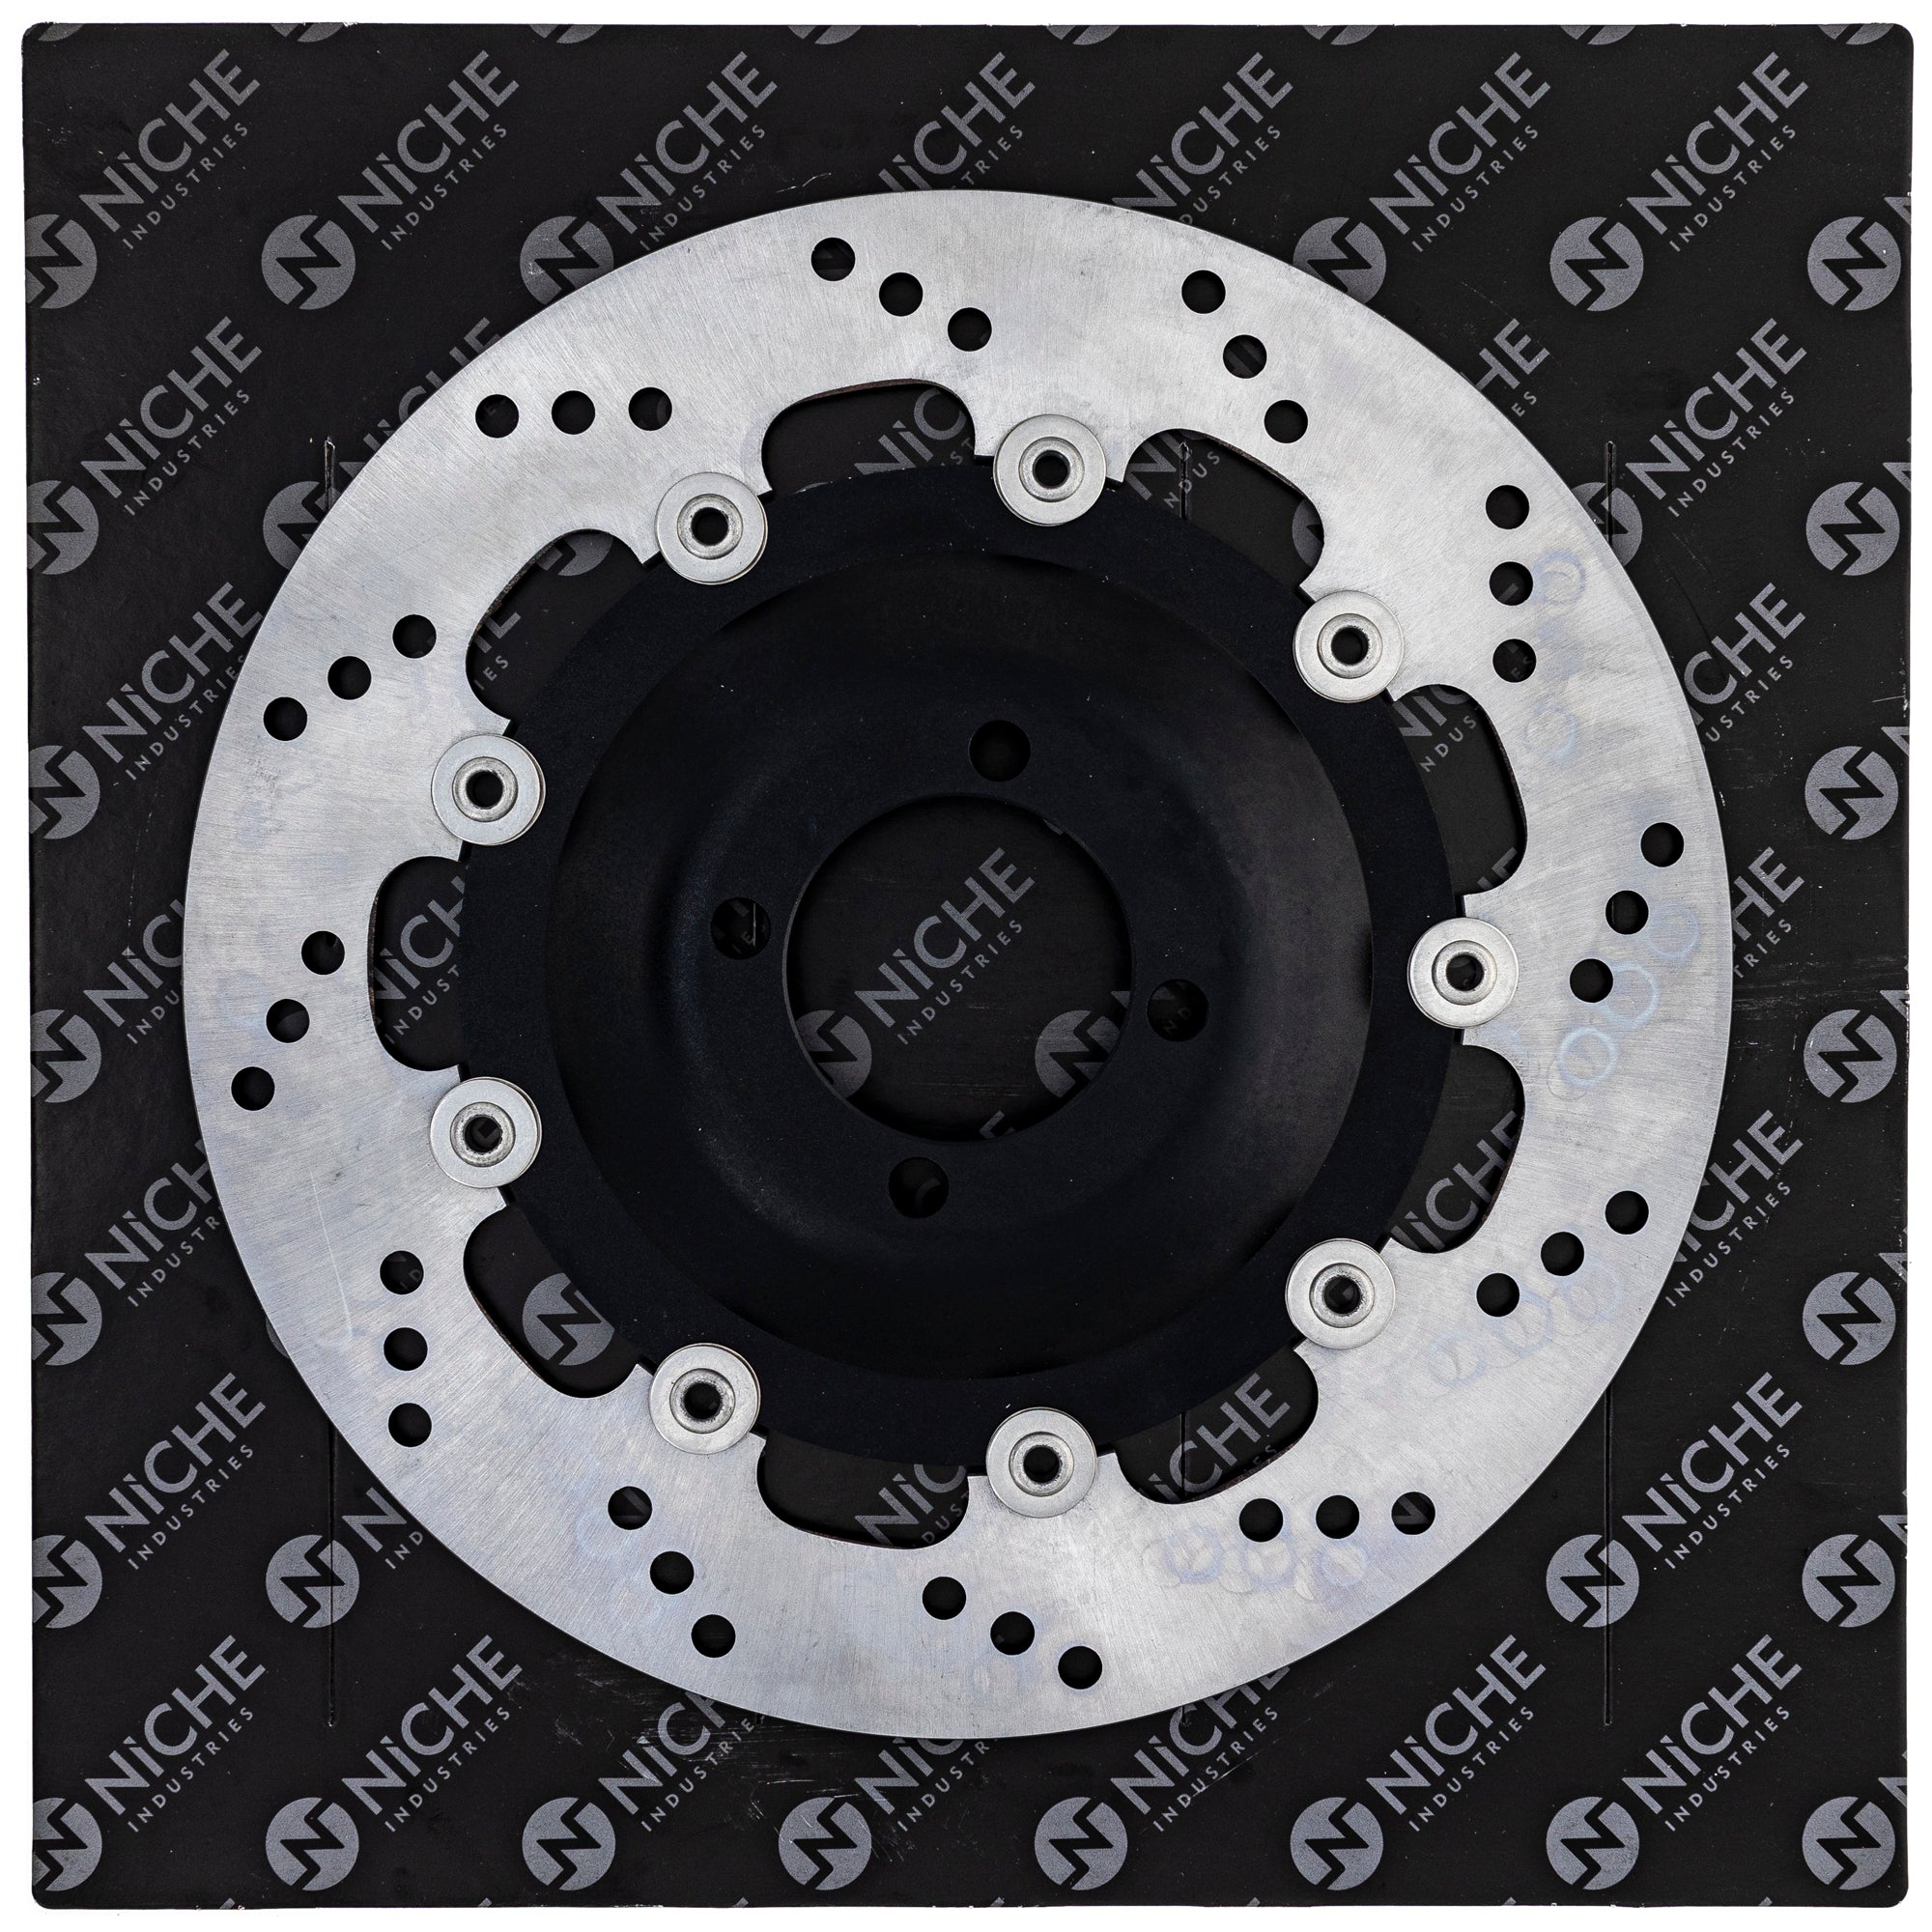 NICHE 519-CRT2400R Front Brake Rotor for zOTHER R80 R65 R100RT R100RS